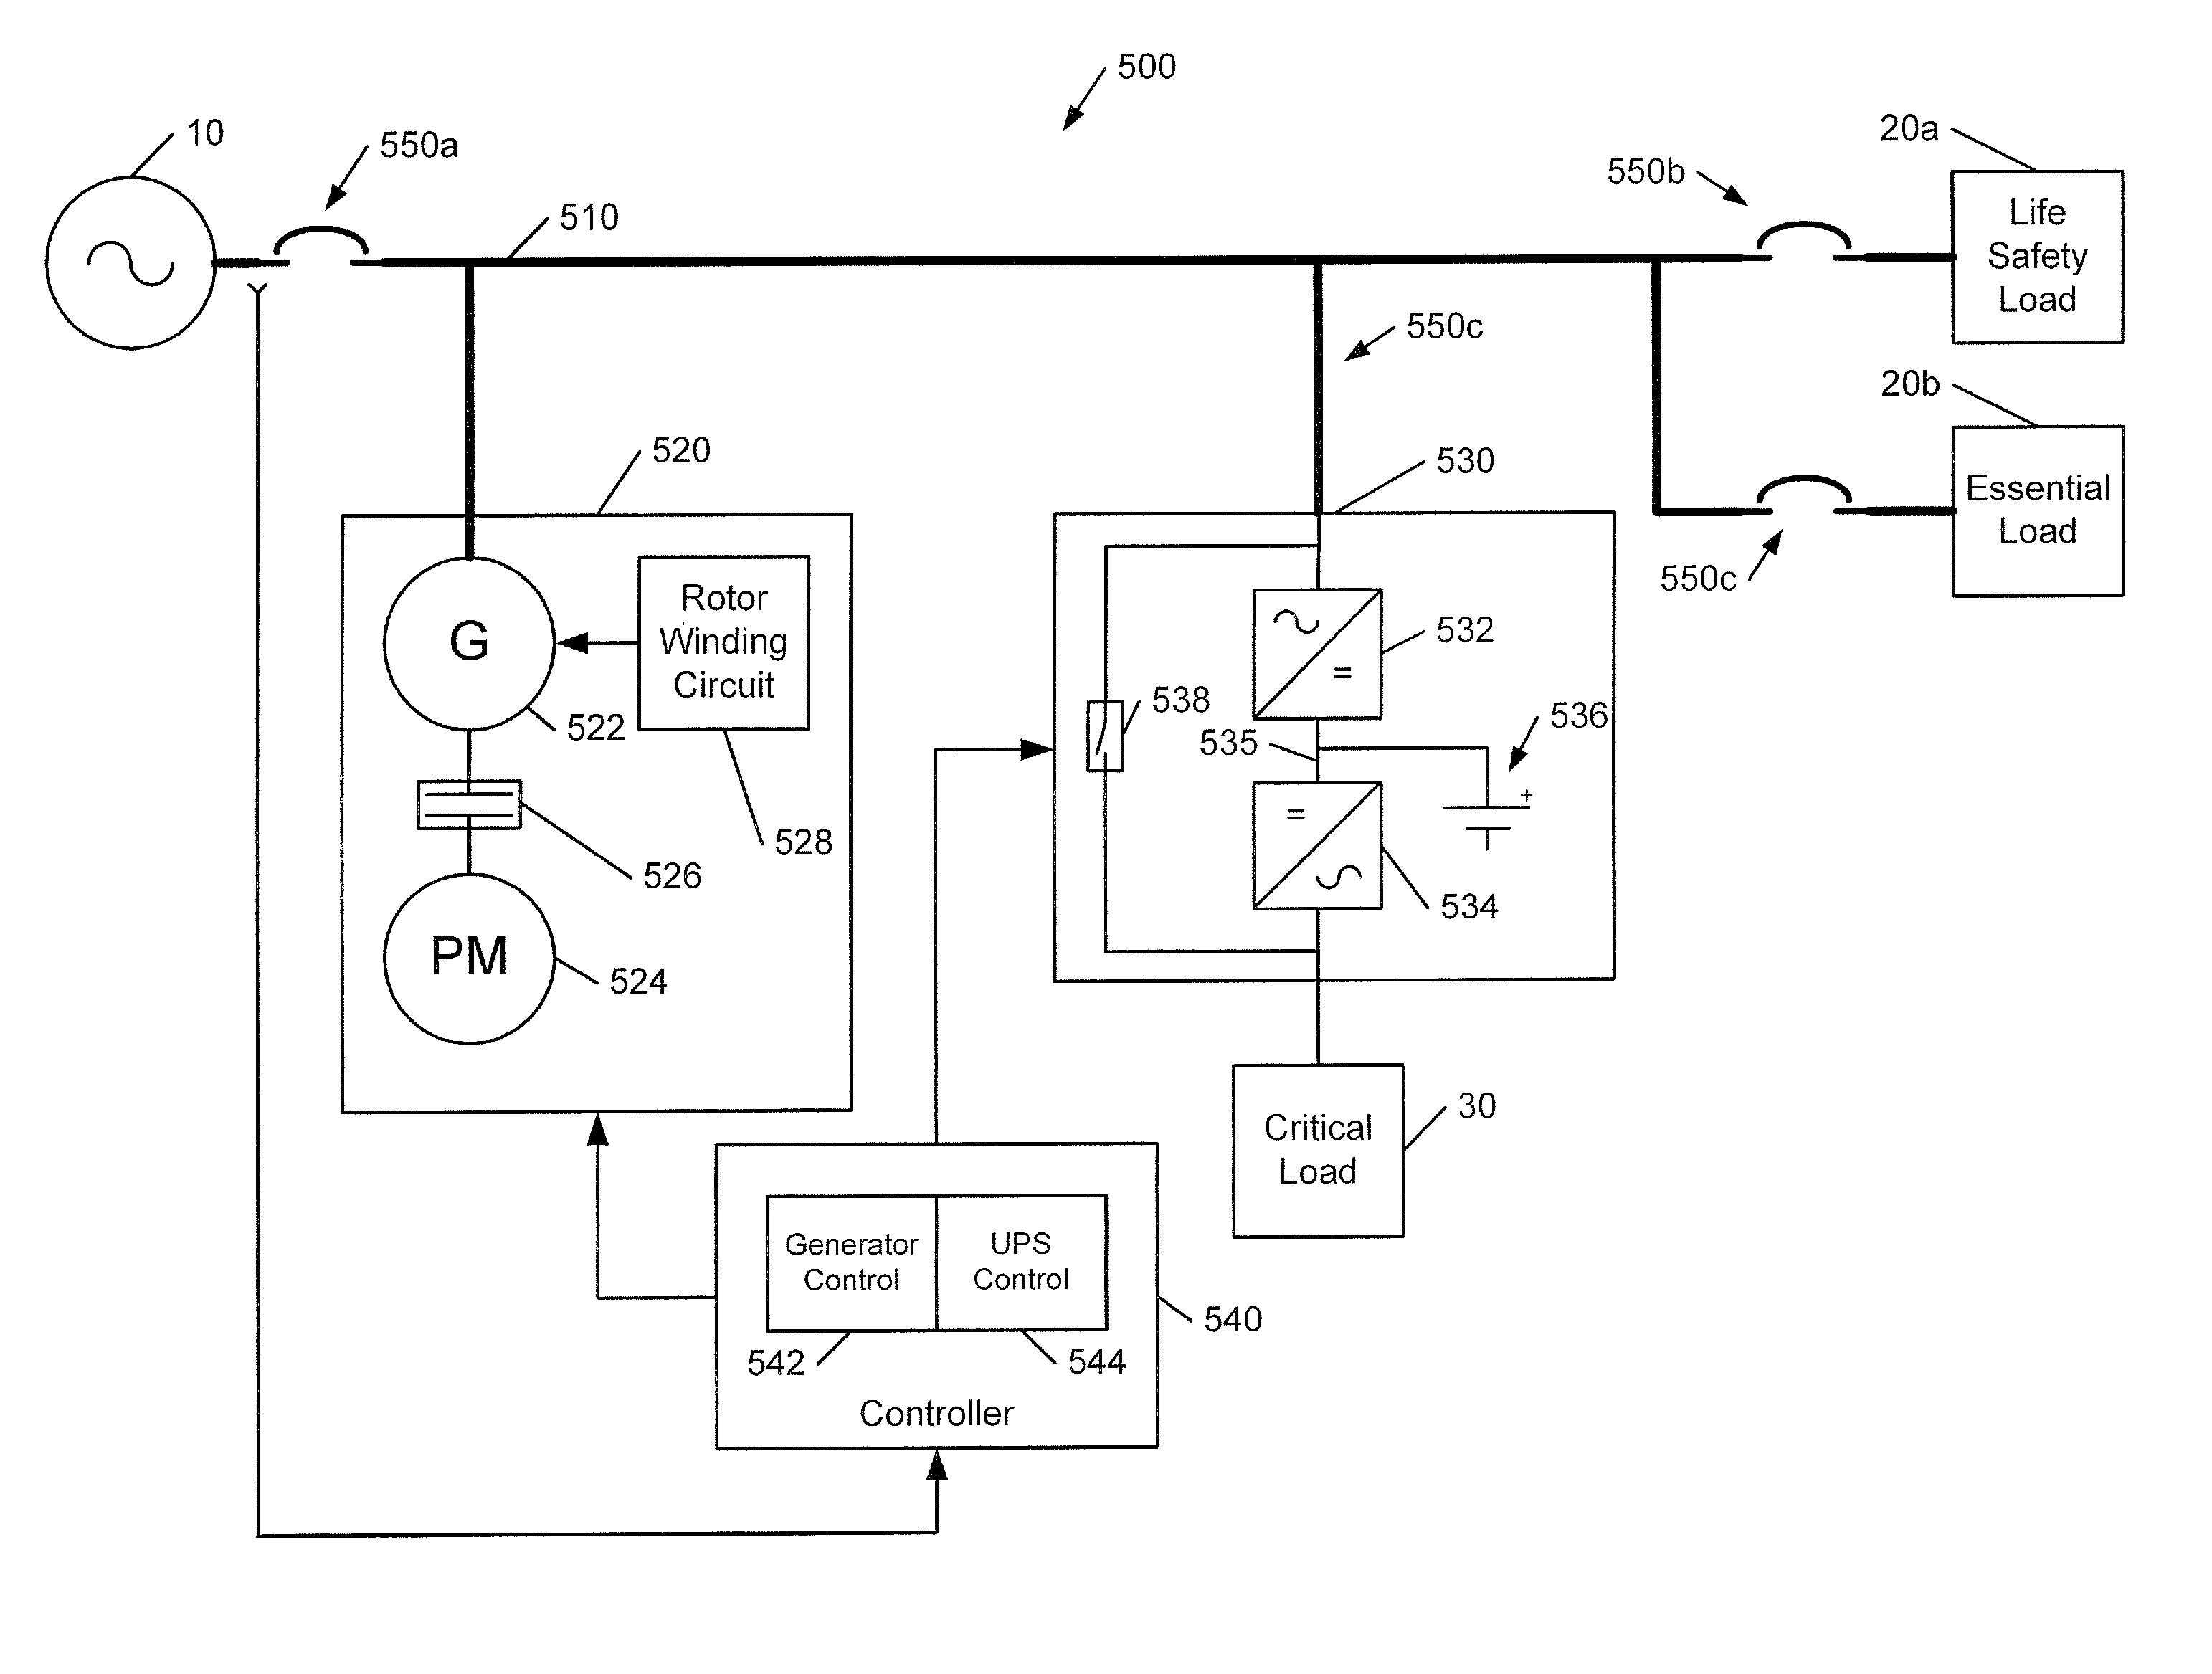 Power systems and methods using an induction generator in cooperation with an uninterruptible power supply